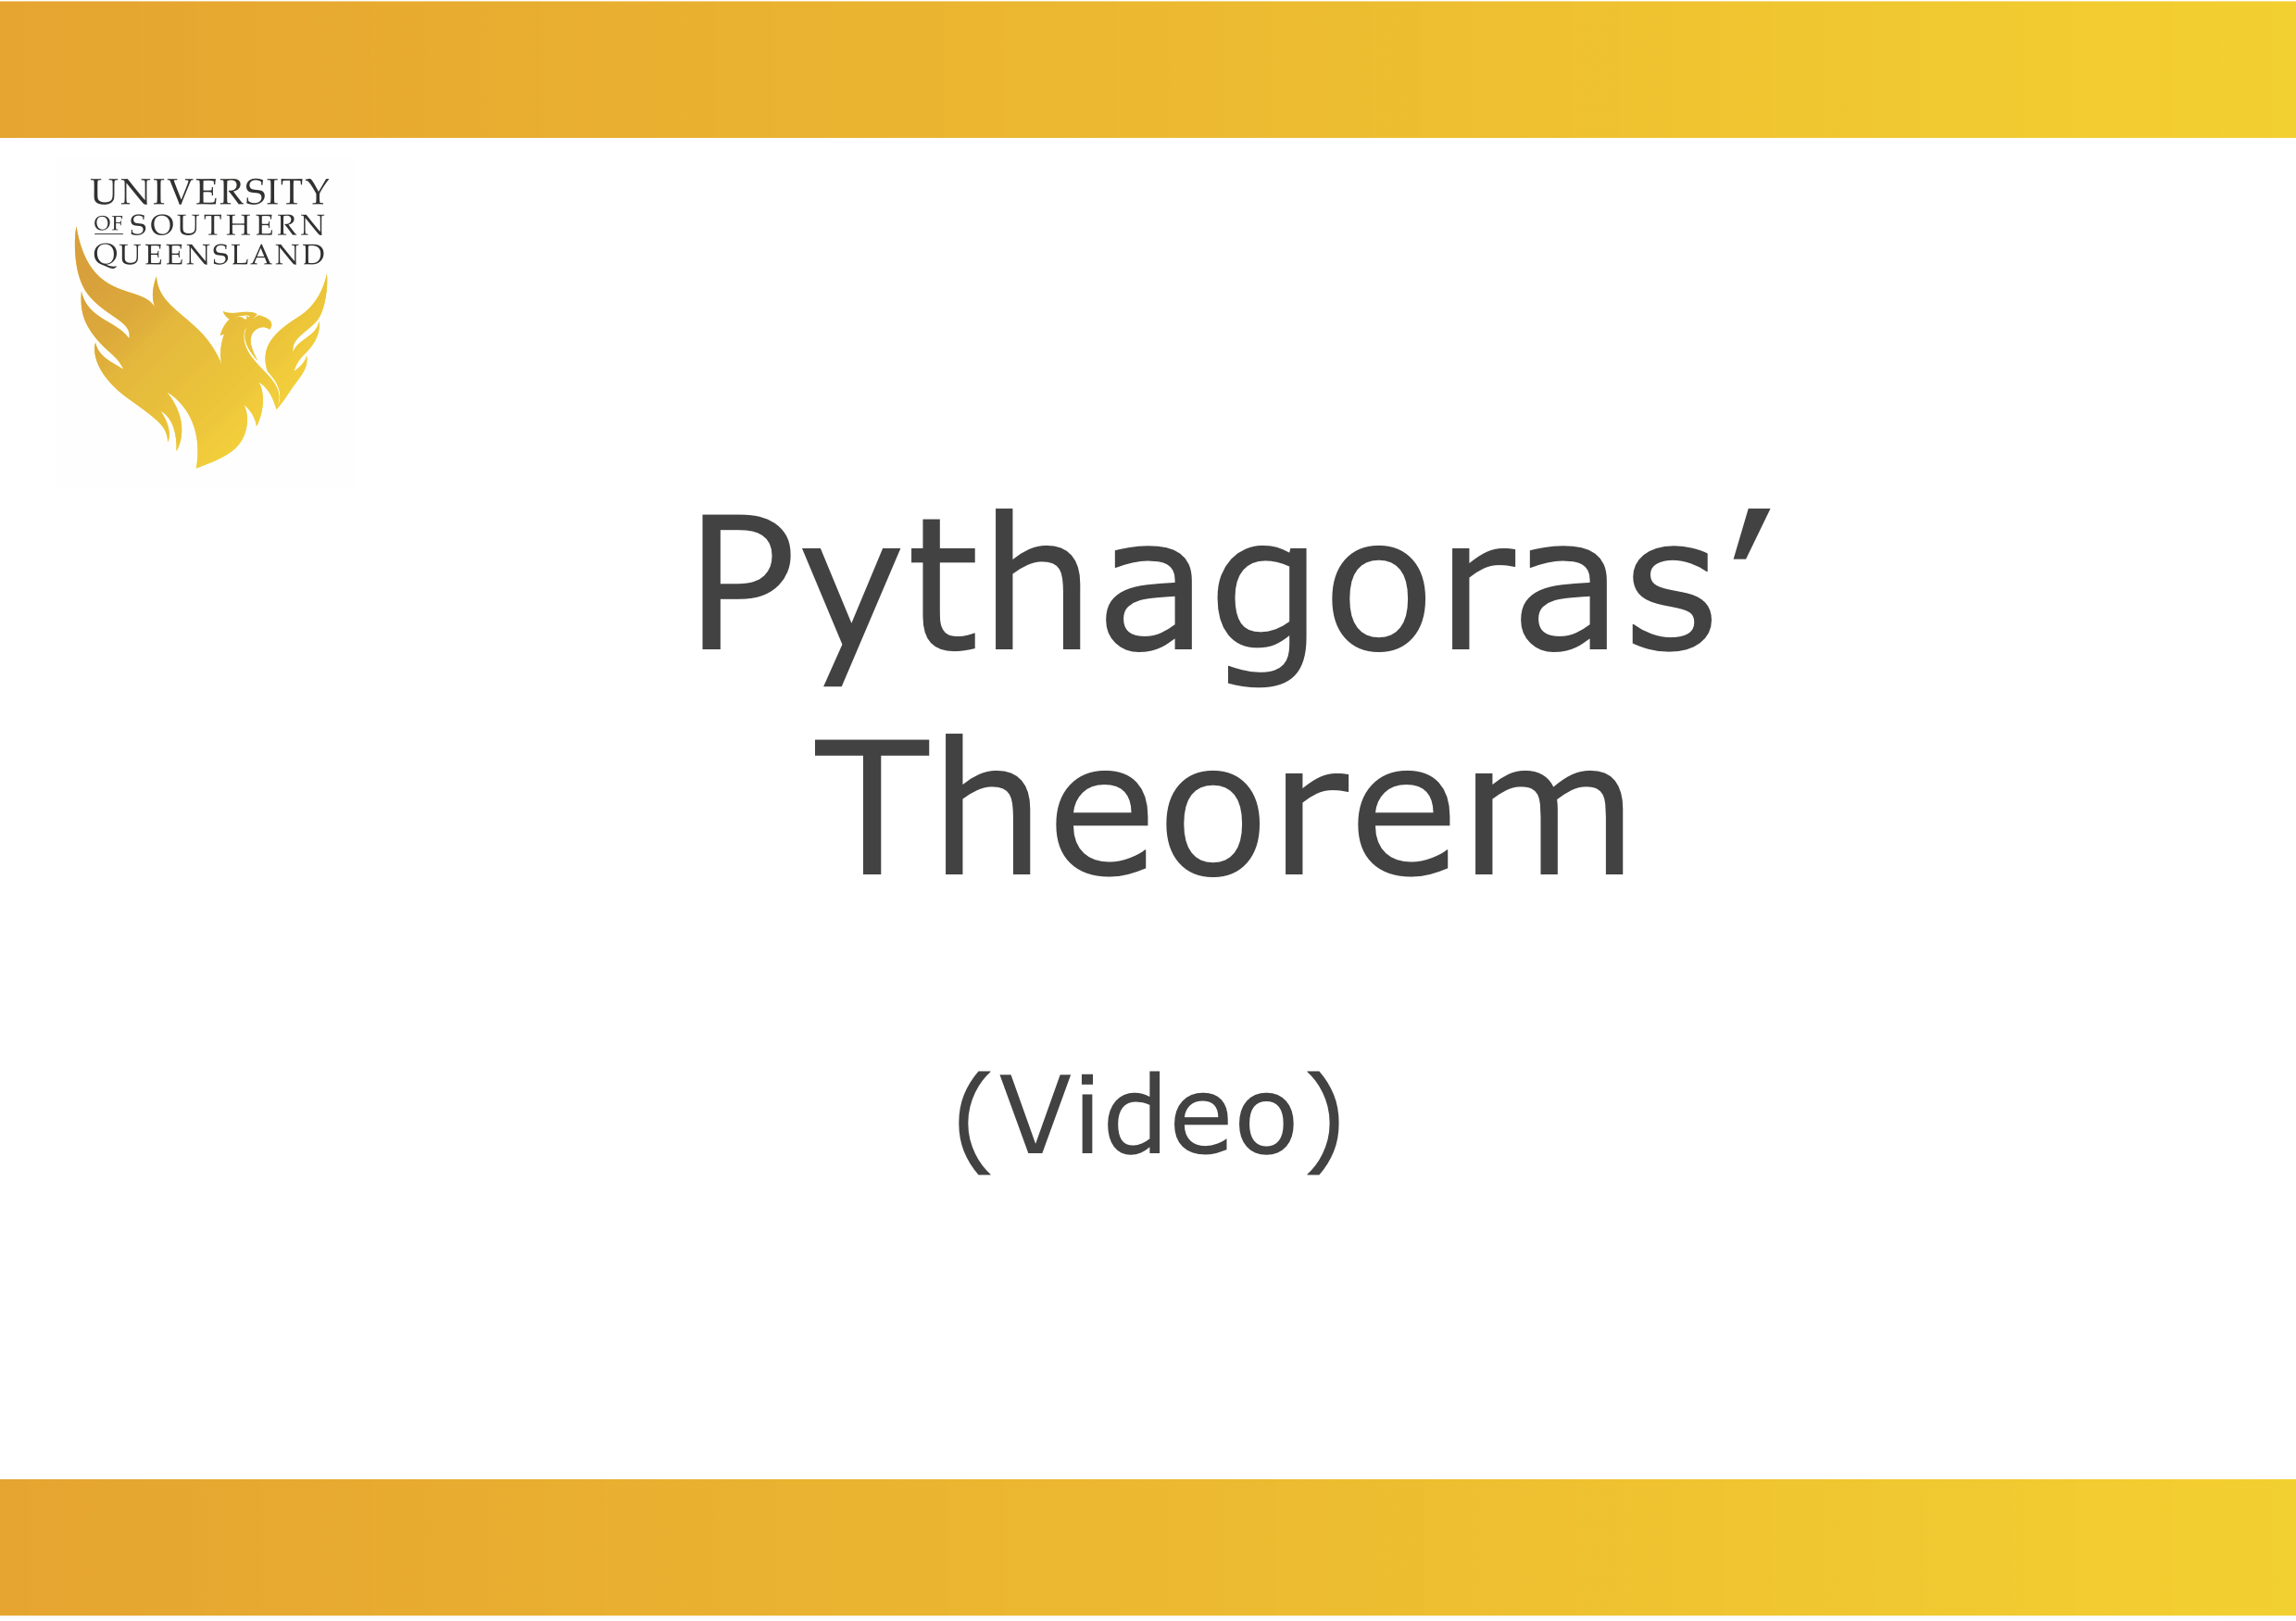 Image to play the video for Pythagoras' Theorem